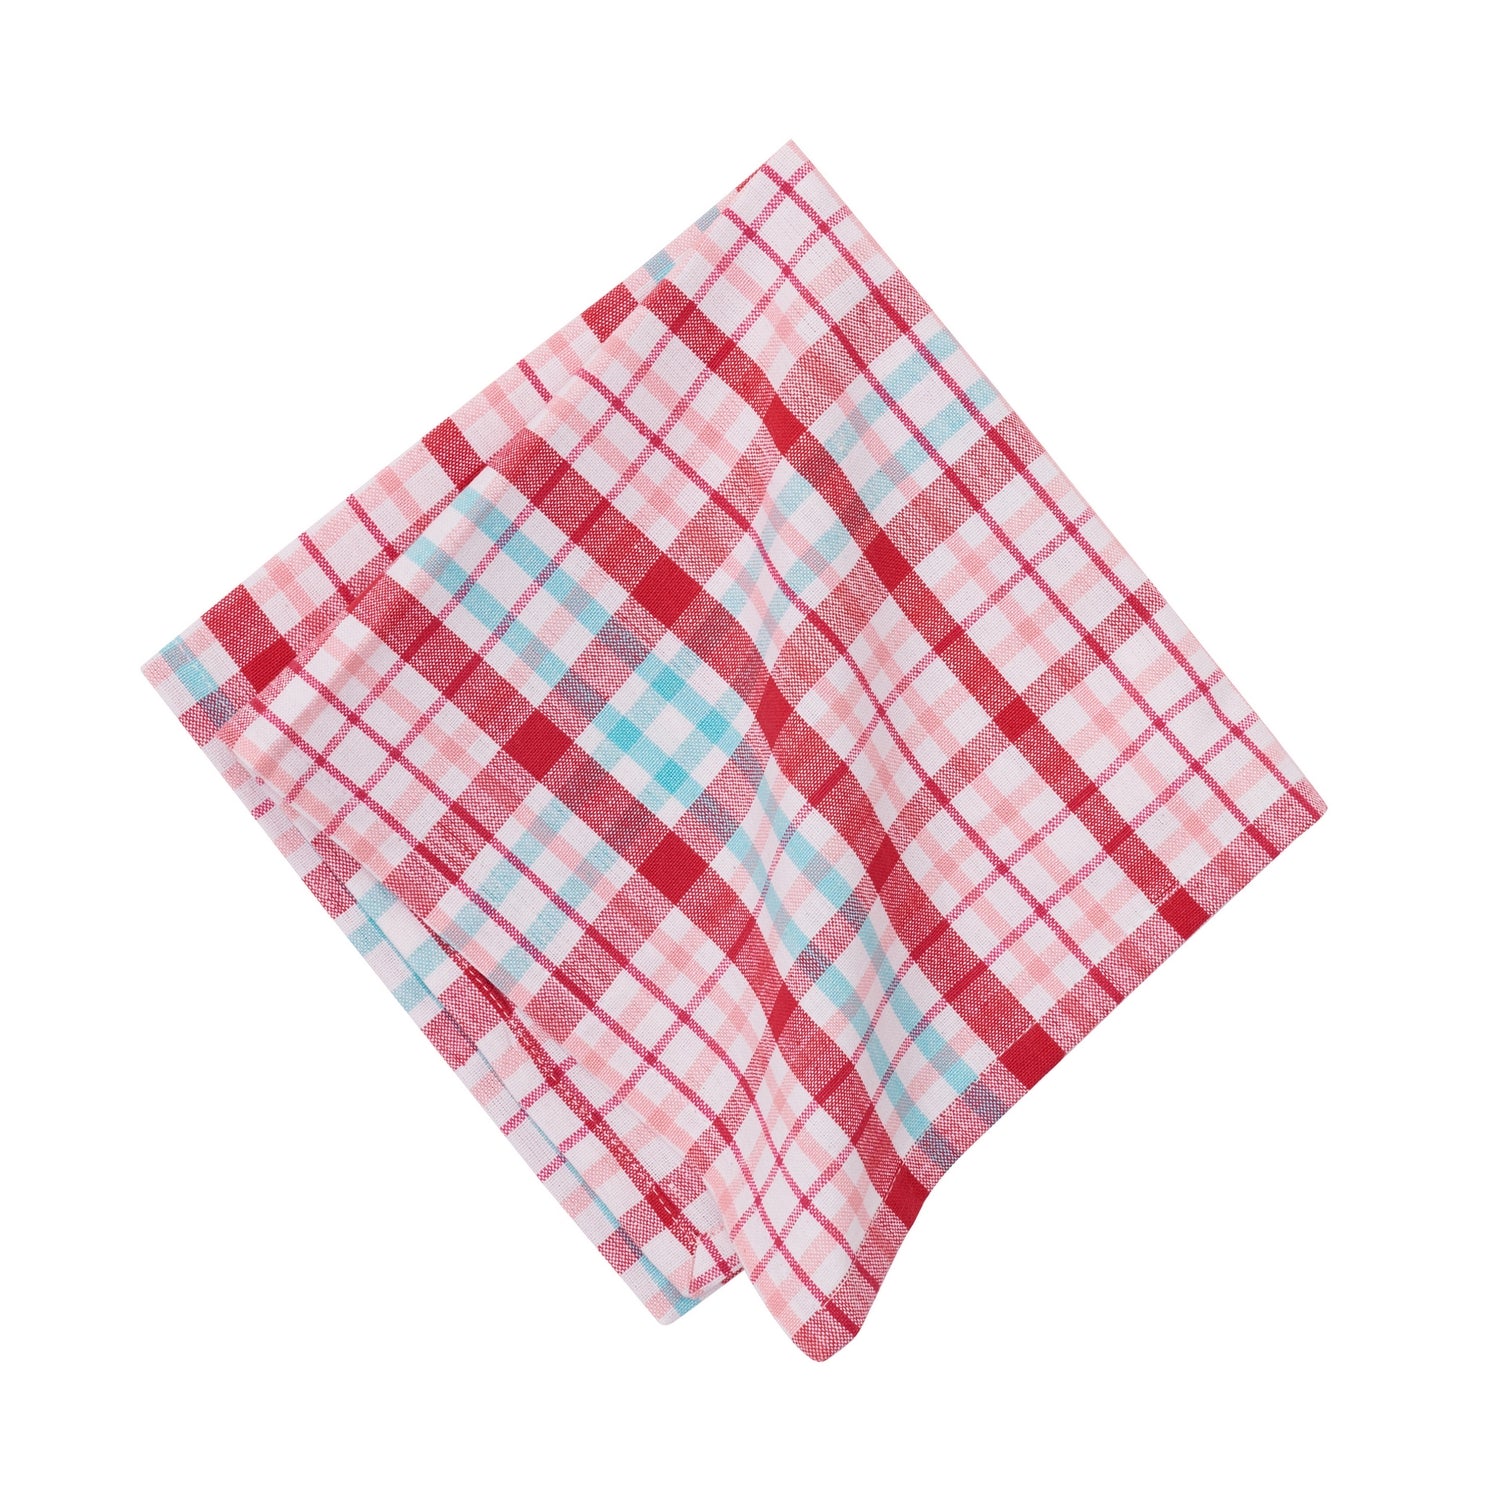 A pink and blue Love Struck Plaid cloth napkin on a white background, perfect for adding a touch of elegance to your tabletop collection or for use as dining room napkins.